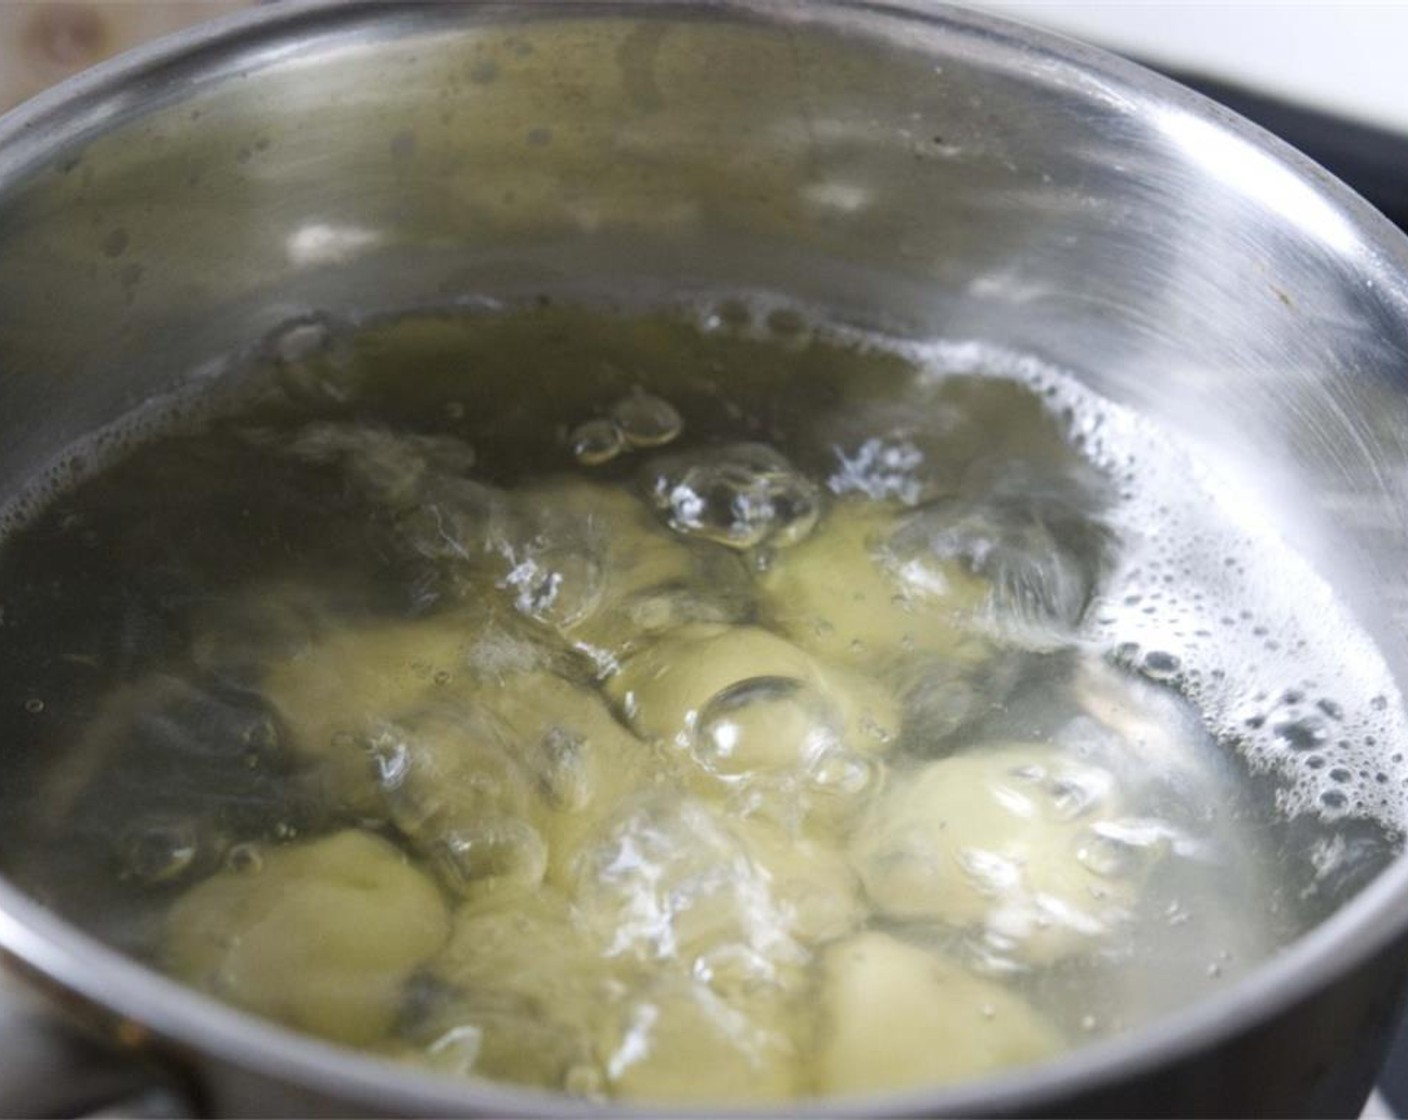 step 2 Wash and peel off the skin of the Potatoes (6) and boil them in a pot. Add Salt (1 tsp) to the water and cook for about 15 minutes.